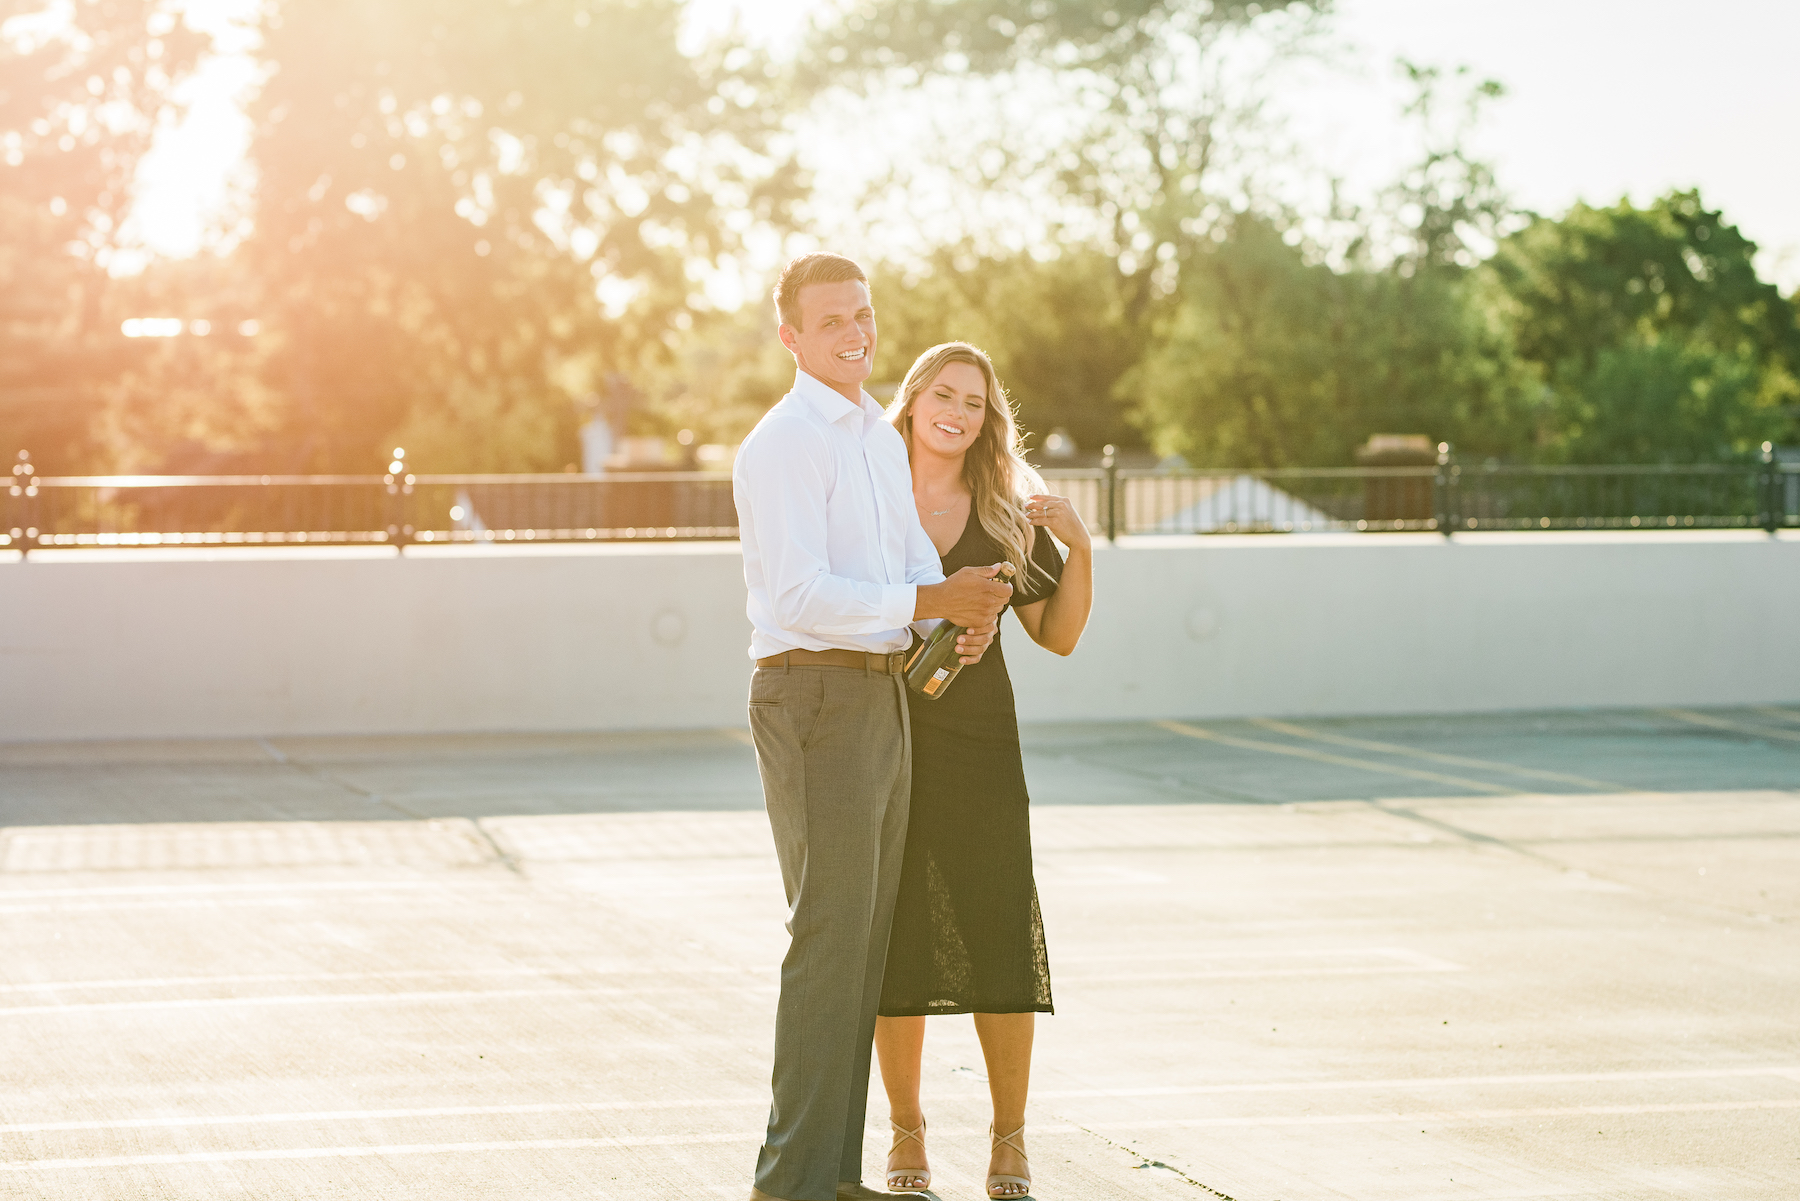 A portrait of a couple at sunset popping champagne on a rooftop.